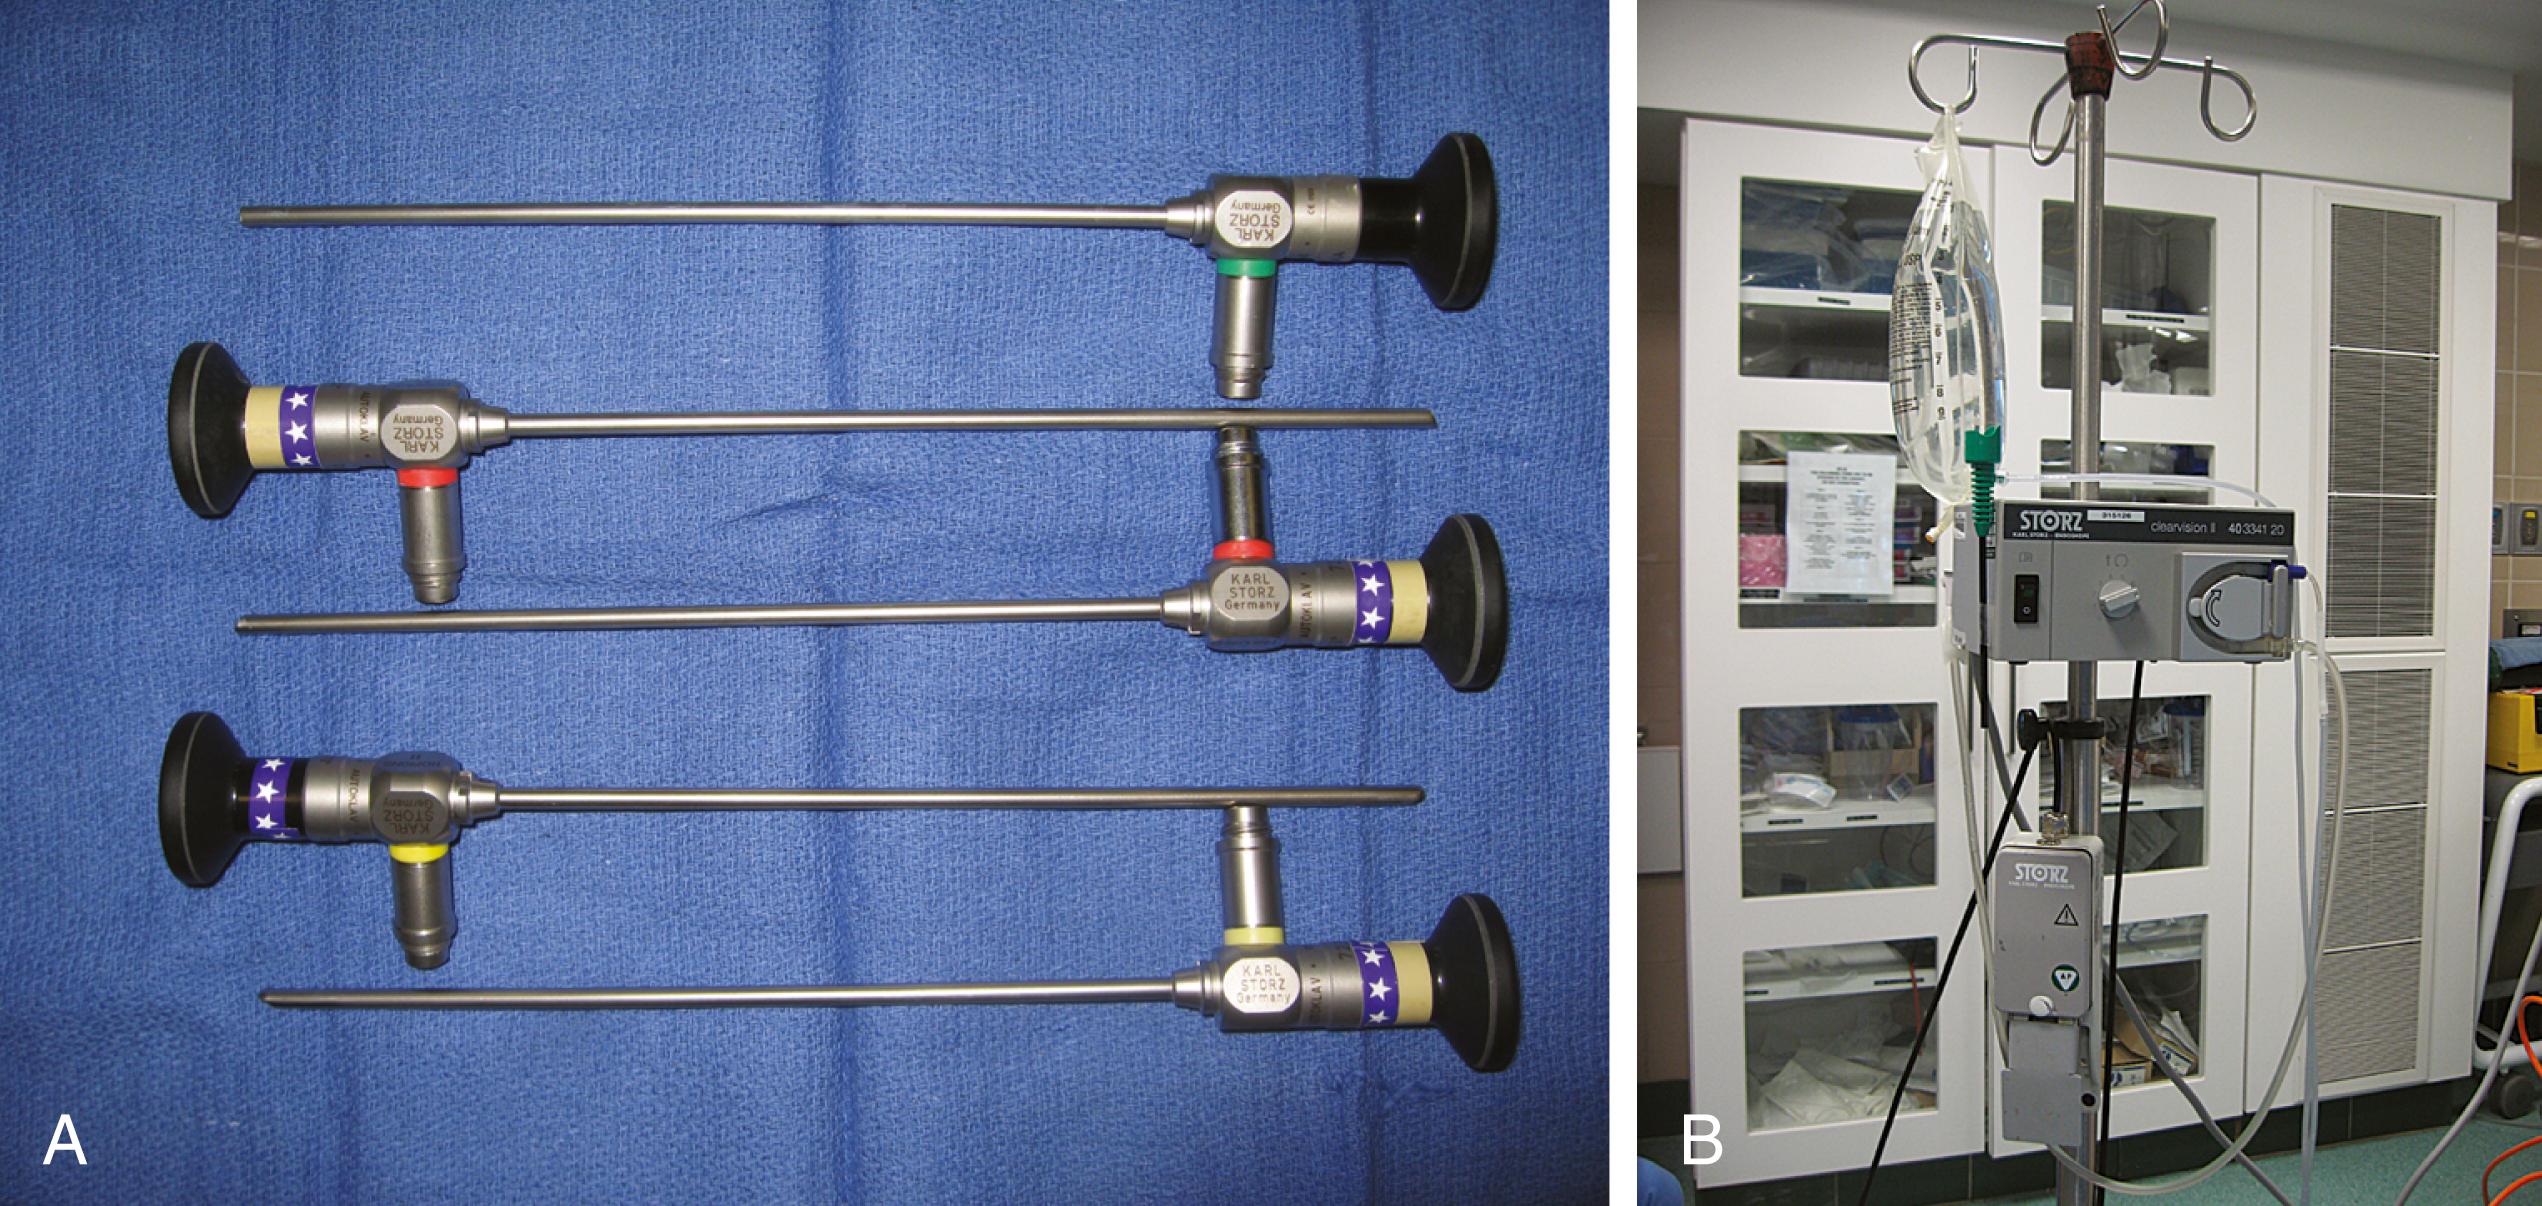 FIGURE 15.4, The sinonasal endoscopes used for endonasal pituitary surgery are 4 mm in diameter and 18 cm in length with 0-degree, 30-degree angled-up or angled-down, and 70-degree angled-up or angled-down lenses (A). The tube with the green base and black tip is the sheath of the Endoscope Lens Cleansing Device (Endoscrub, Xomed-Treace, Bristol-Myers Squibb, Jacksonville, FL). The base of the battery-powered lens cleansing device (Endovision, Karl Storz, Tuttlingen, Germany) is connected to the endoscope sheath and serves as a tool for cleaning the lens using foot pedal control (for forward irrigation of warm saline solution at the lens followed by brief reverse flow) without removing the endoscope from the surgical field (B).